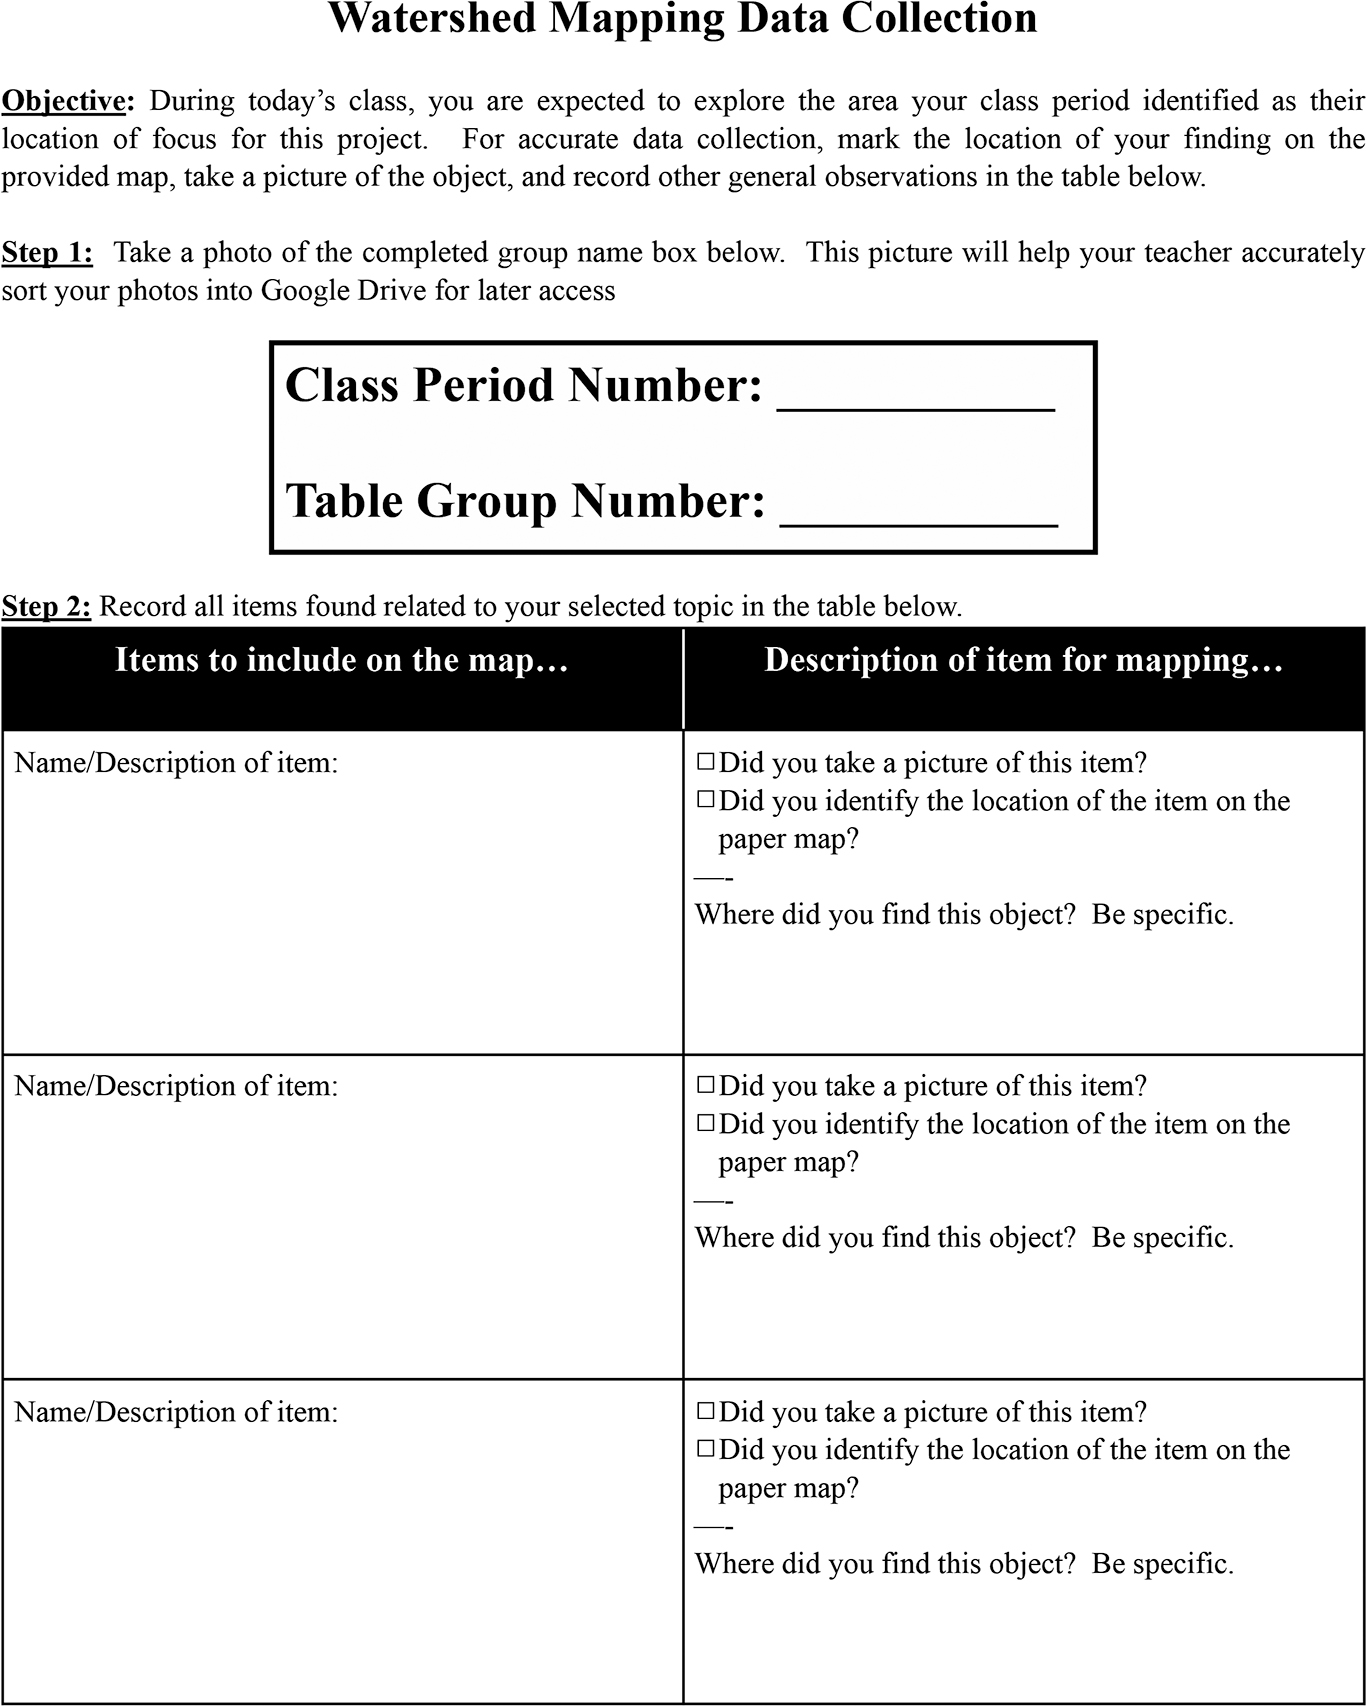 Data collection handout